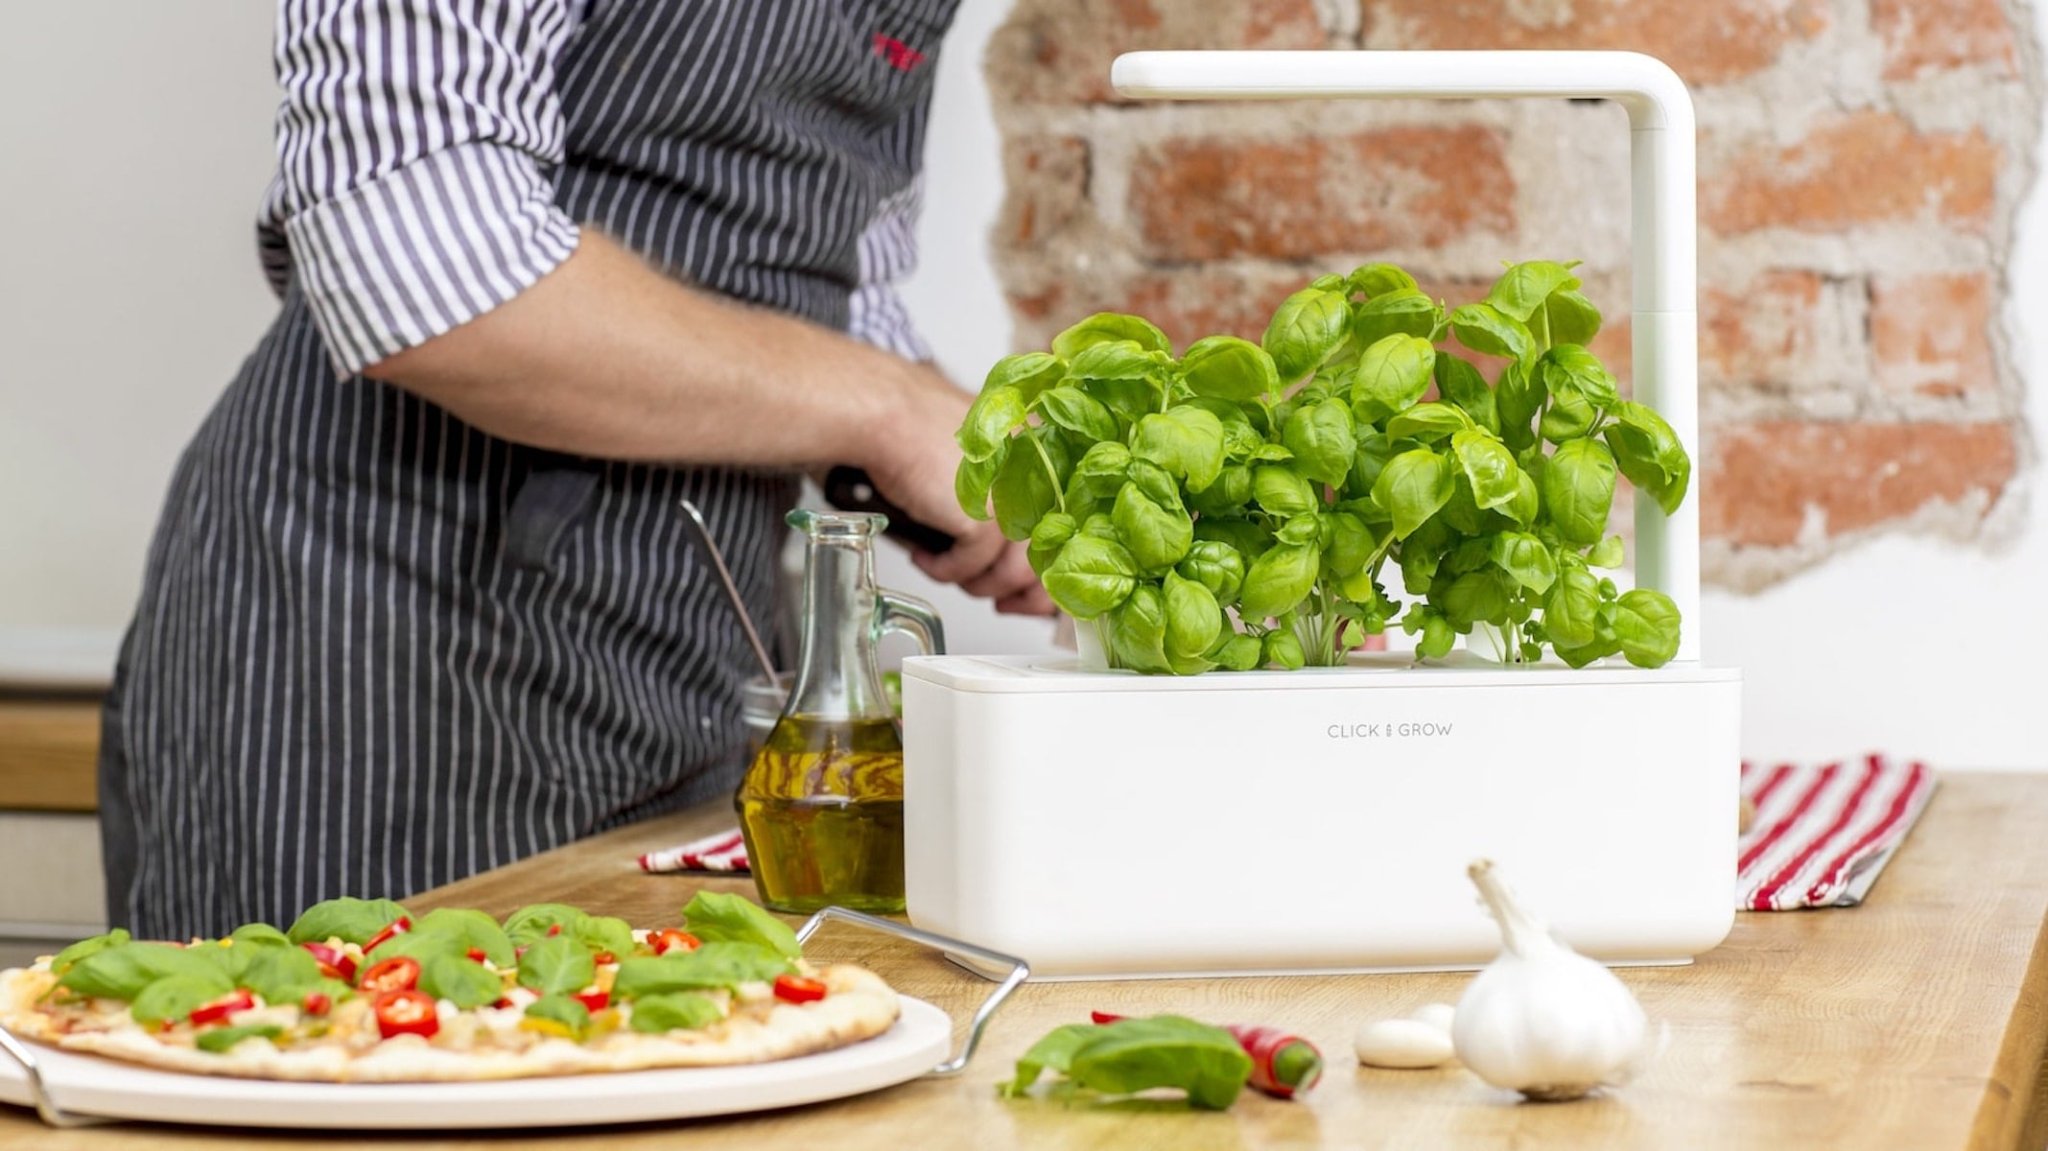 Top 5 smart garden kits to grow your greens at home